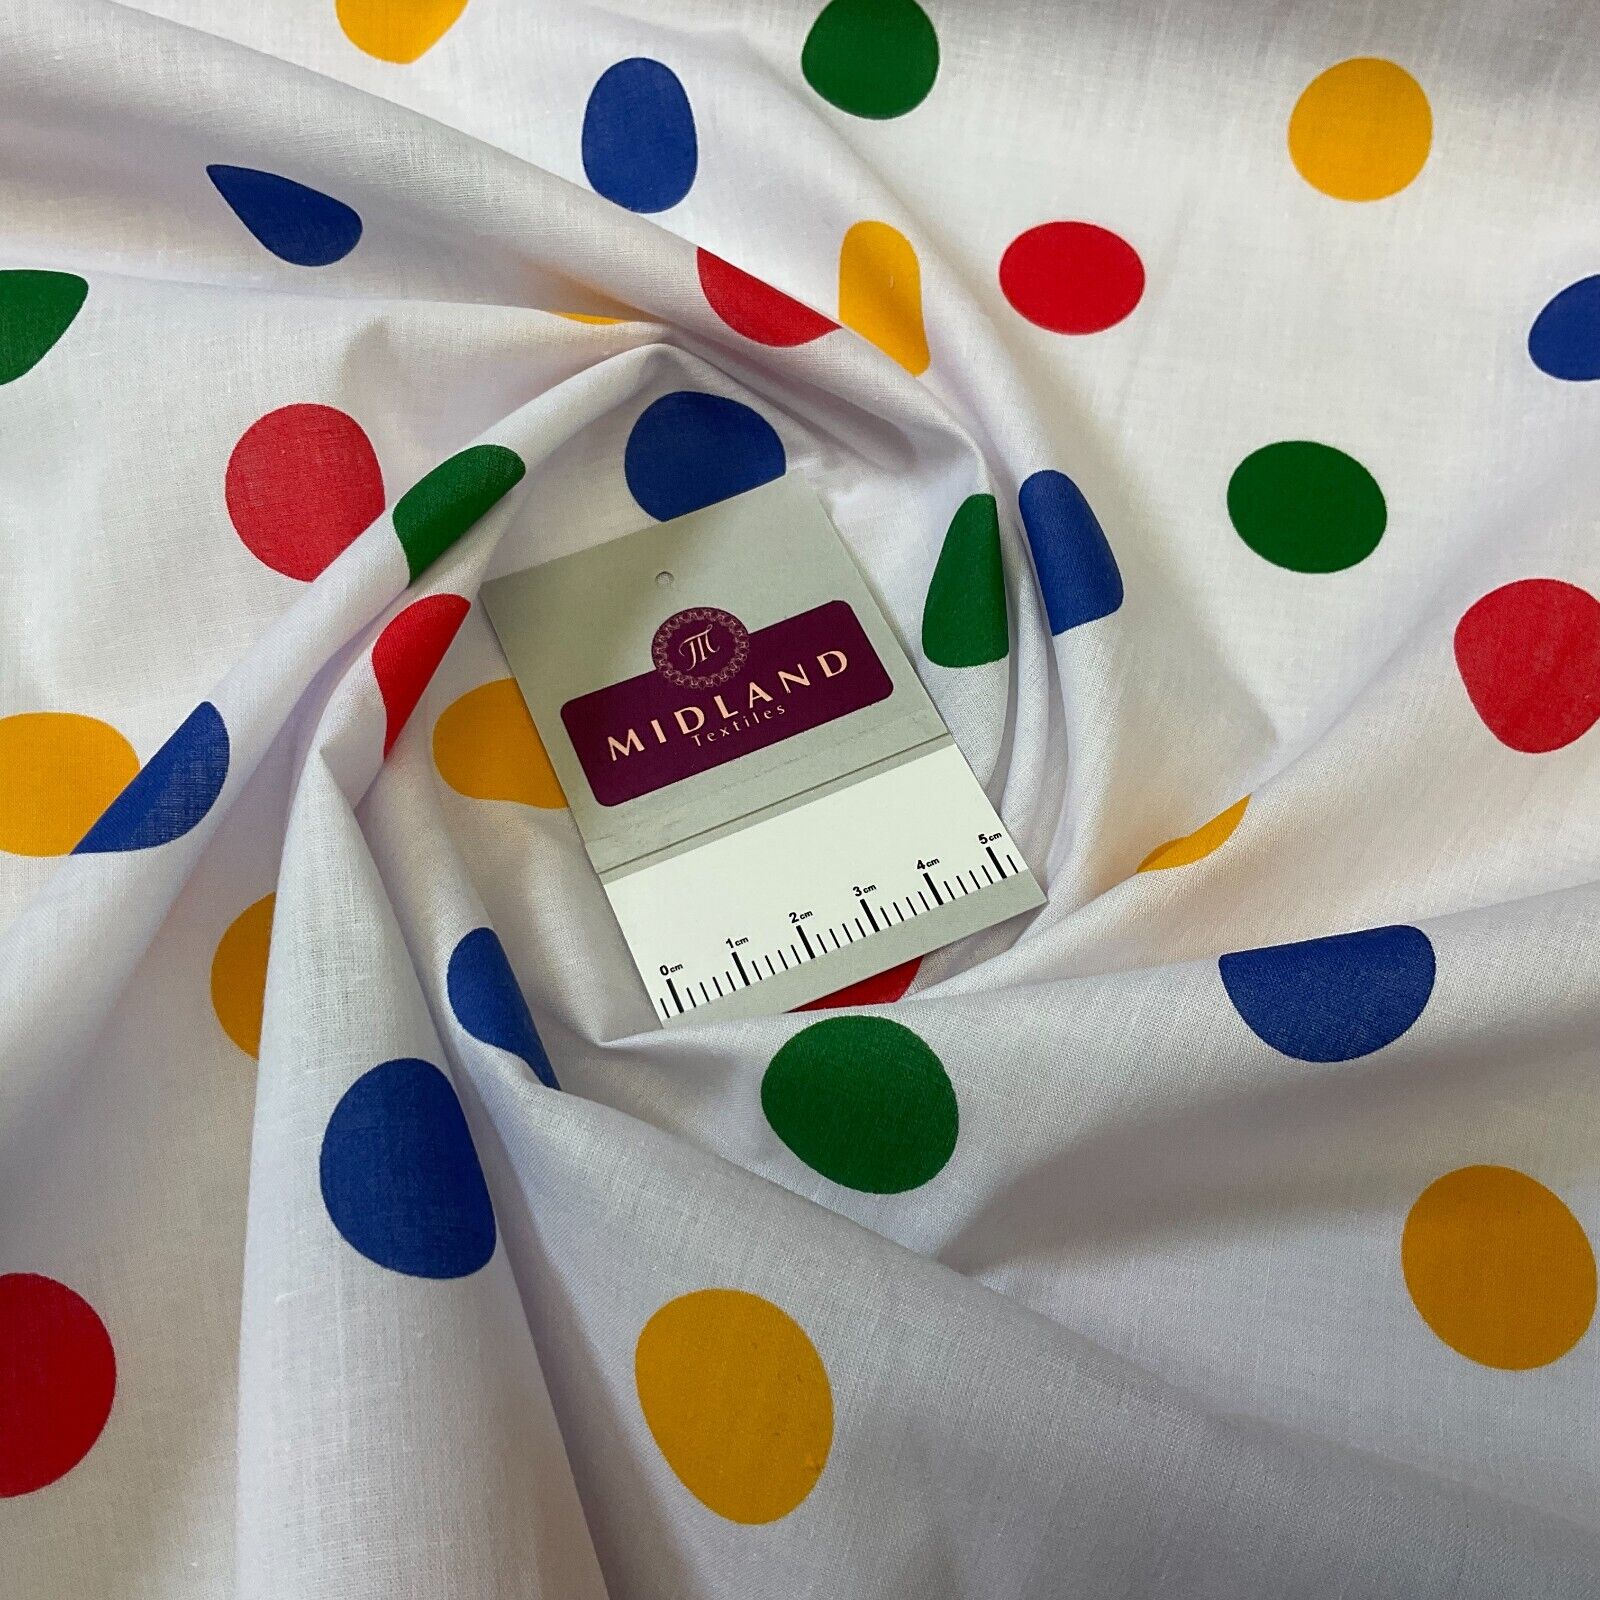 Multi coloured dot spot Poly cotton spotted dotted printed fabric M1709